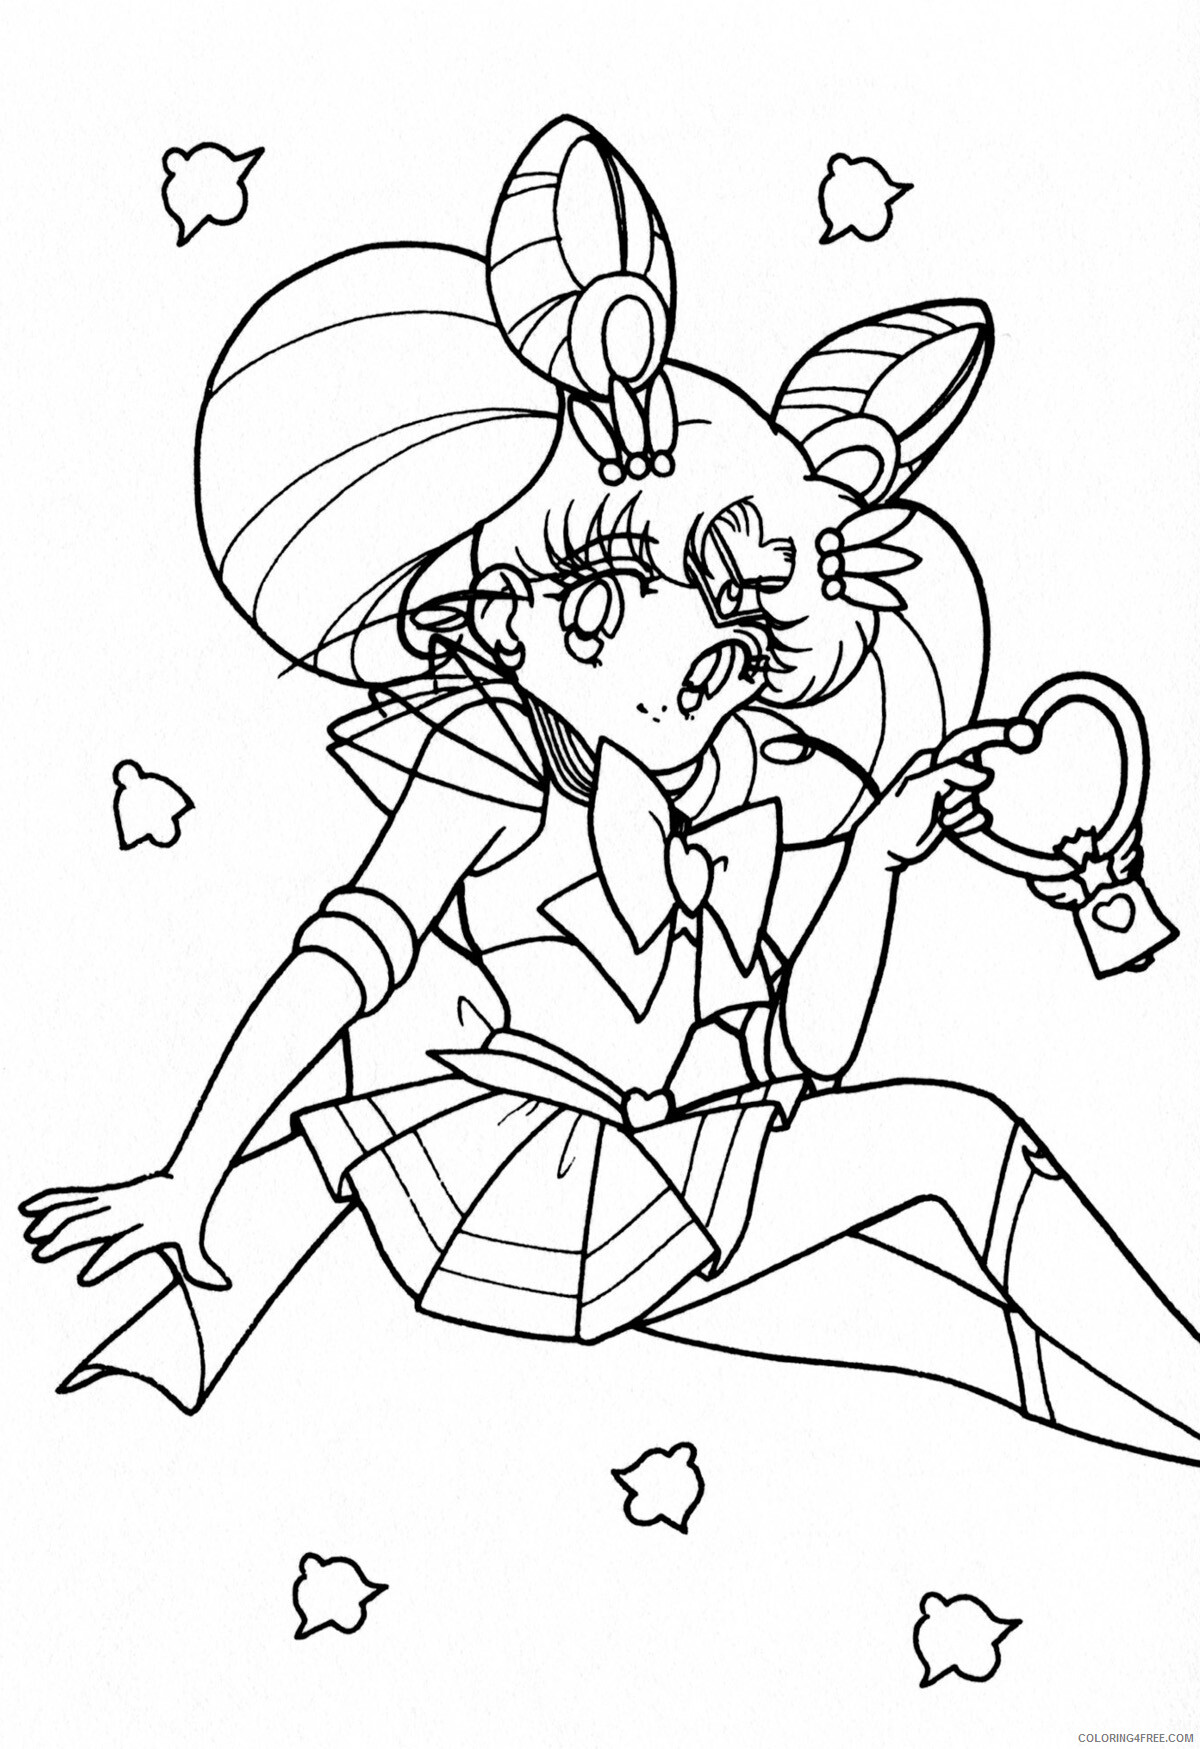 Sailor Moon Printable Coloring Pages Anime Cute Sailor Moon 2021 0968 Coloring4free